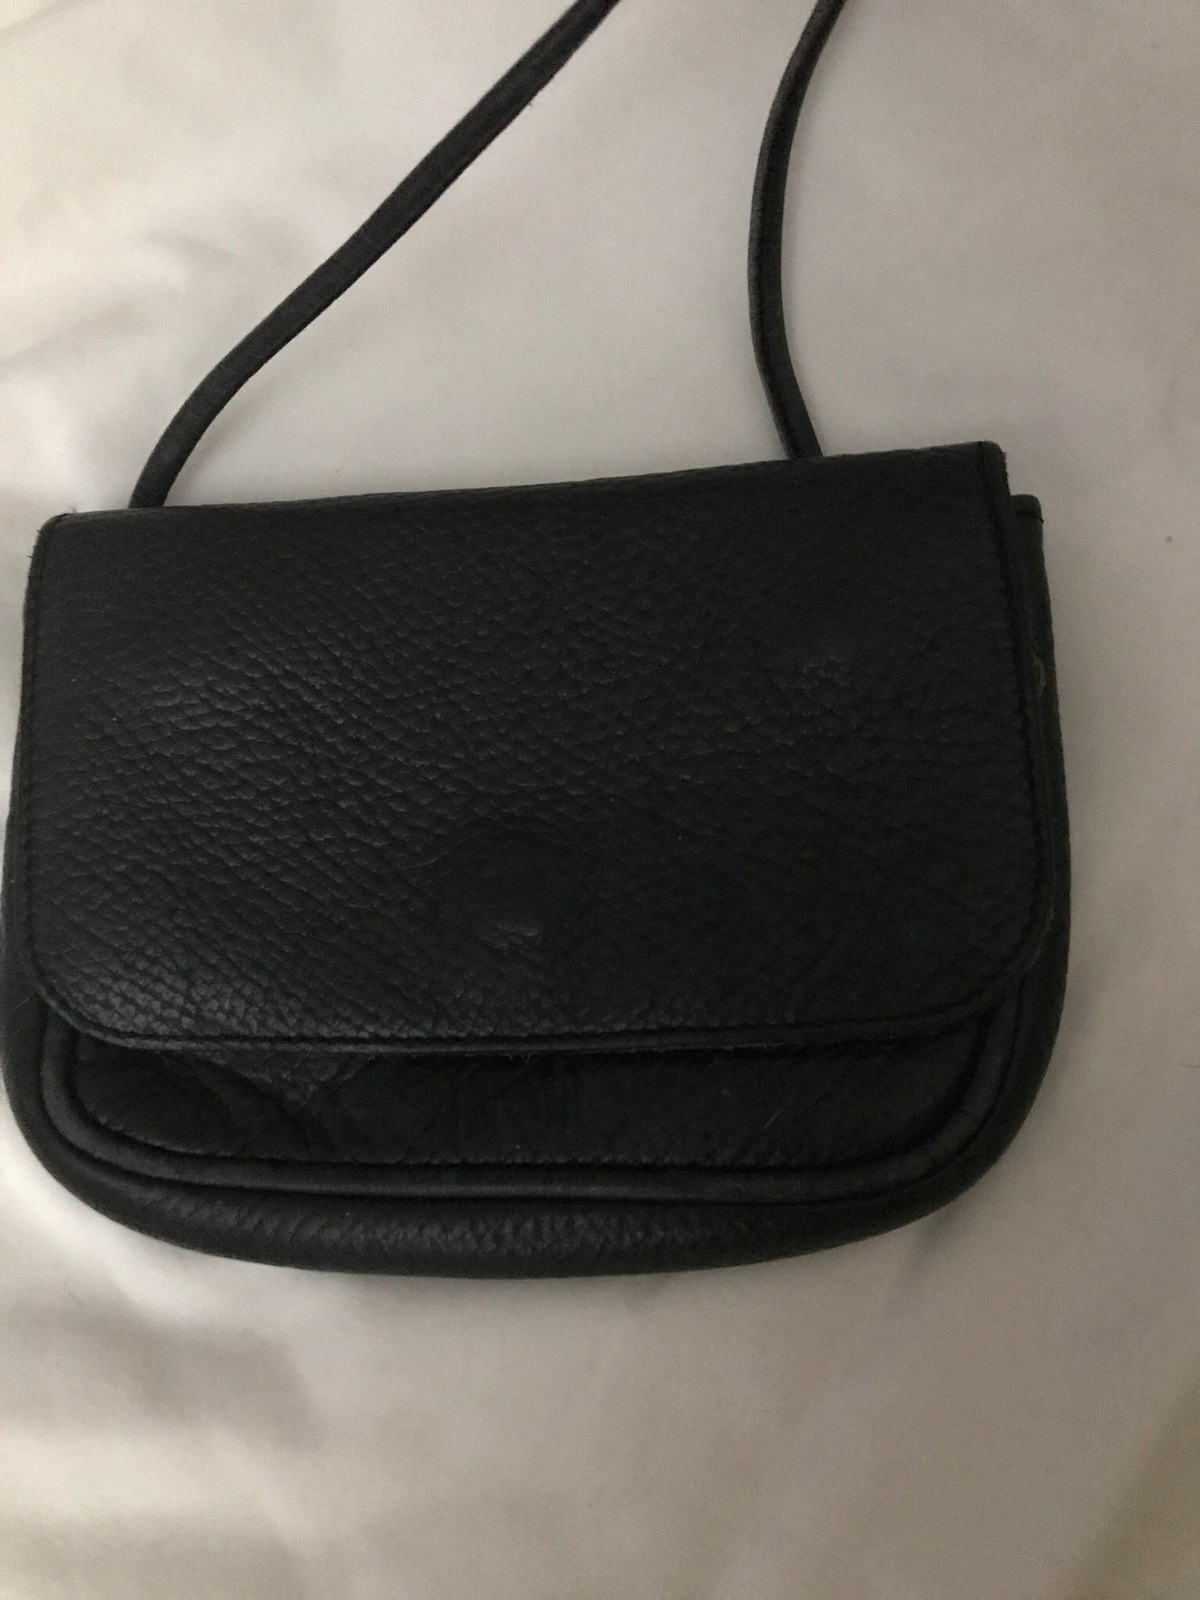 Authentic Roots Black Leather Crossover - Handbags & Purses